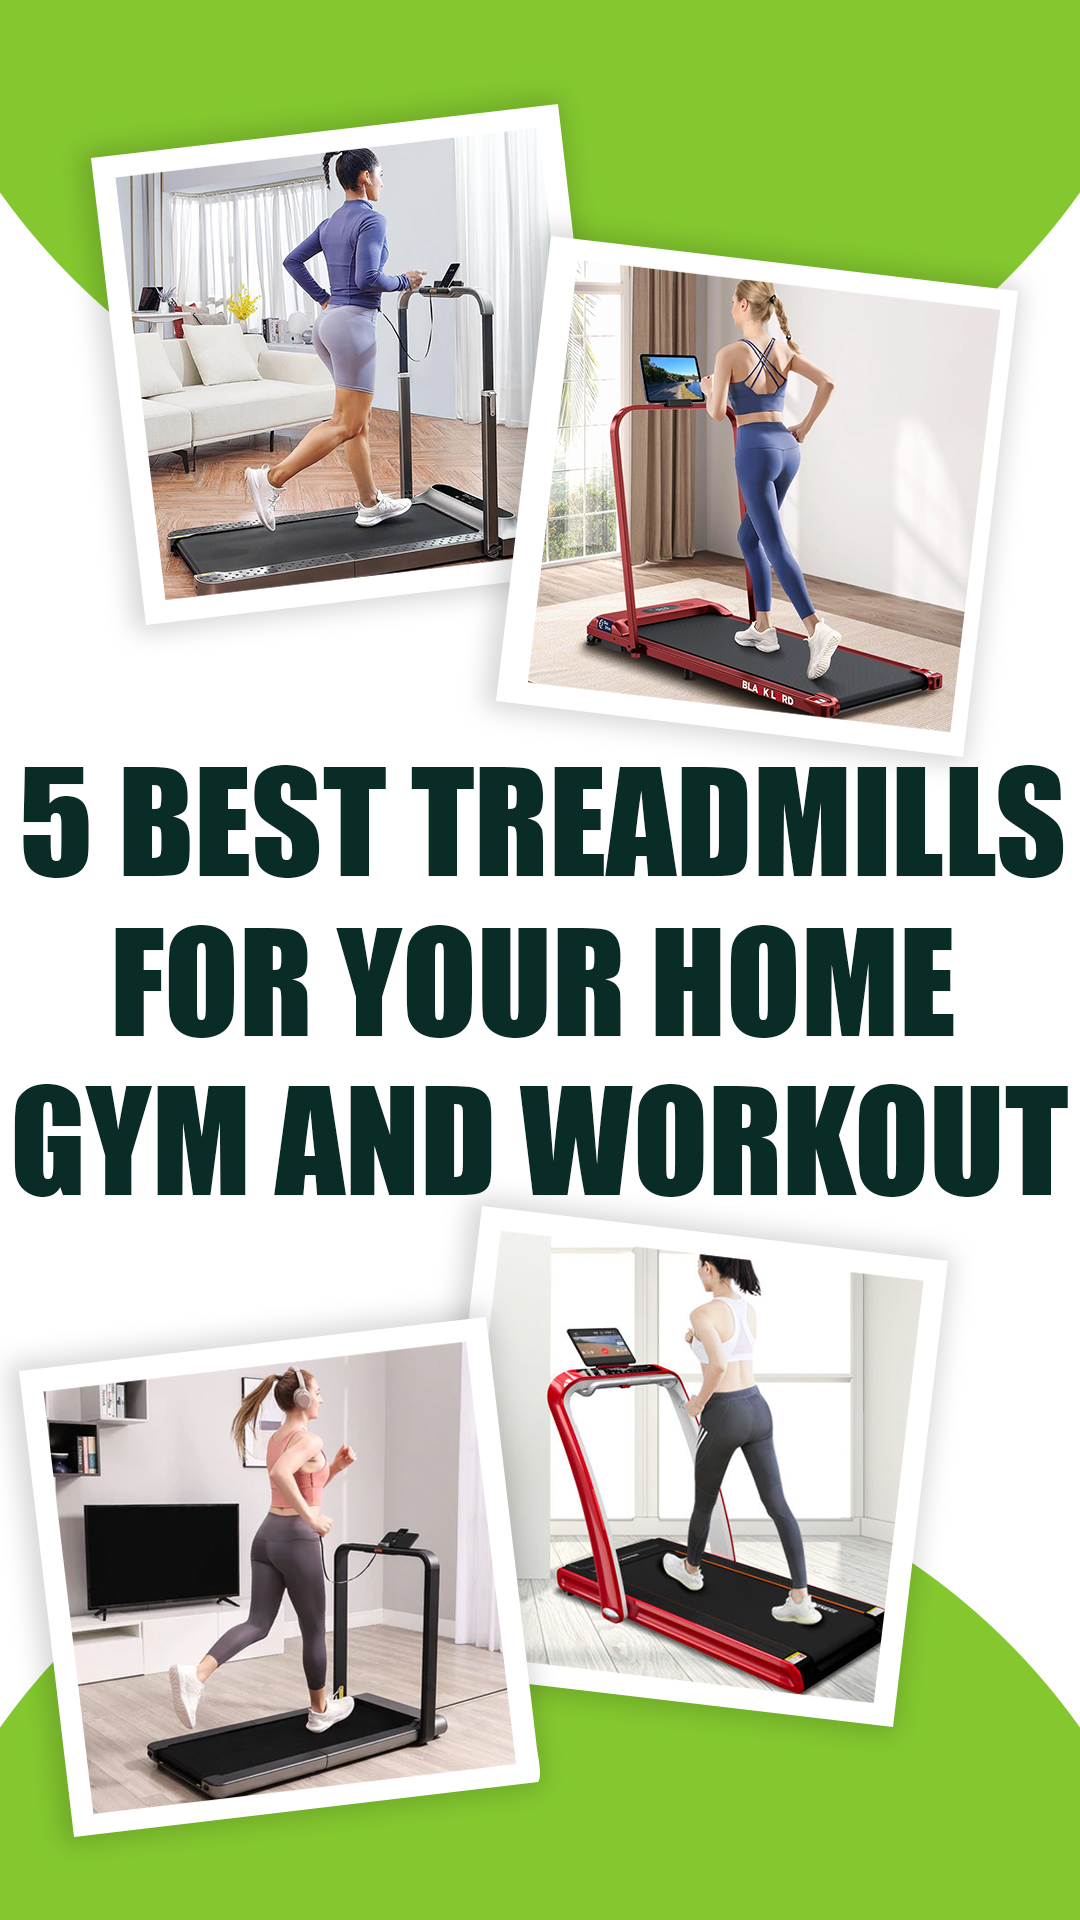 5 Best Treadmills for Your Home Gym